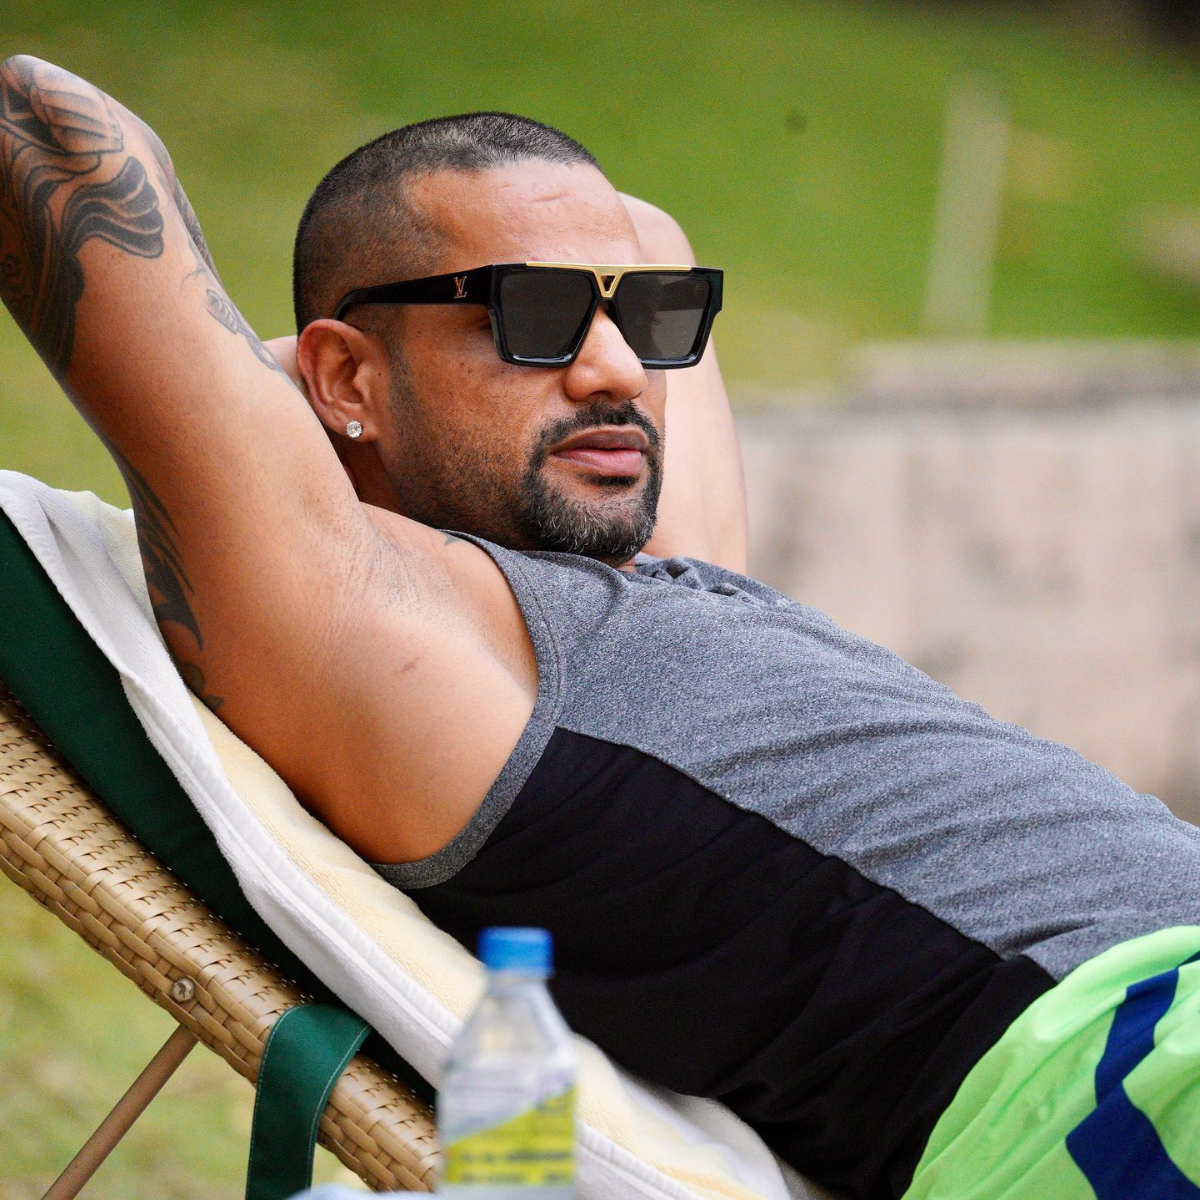 EXCLUSIVE: Shikhar Dhawan to make his acting debut soon; Has already shot for the project